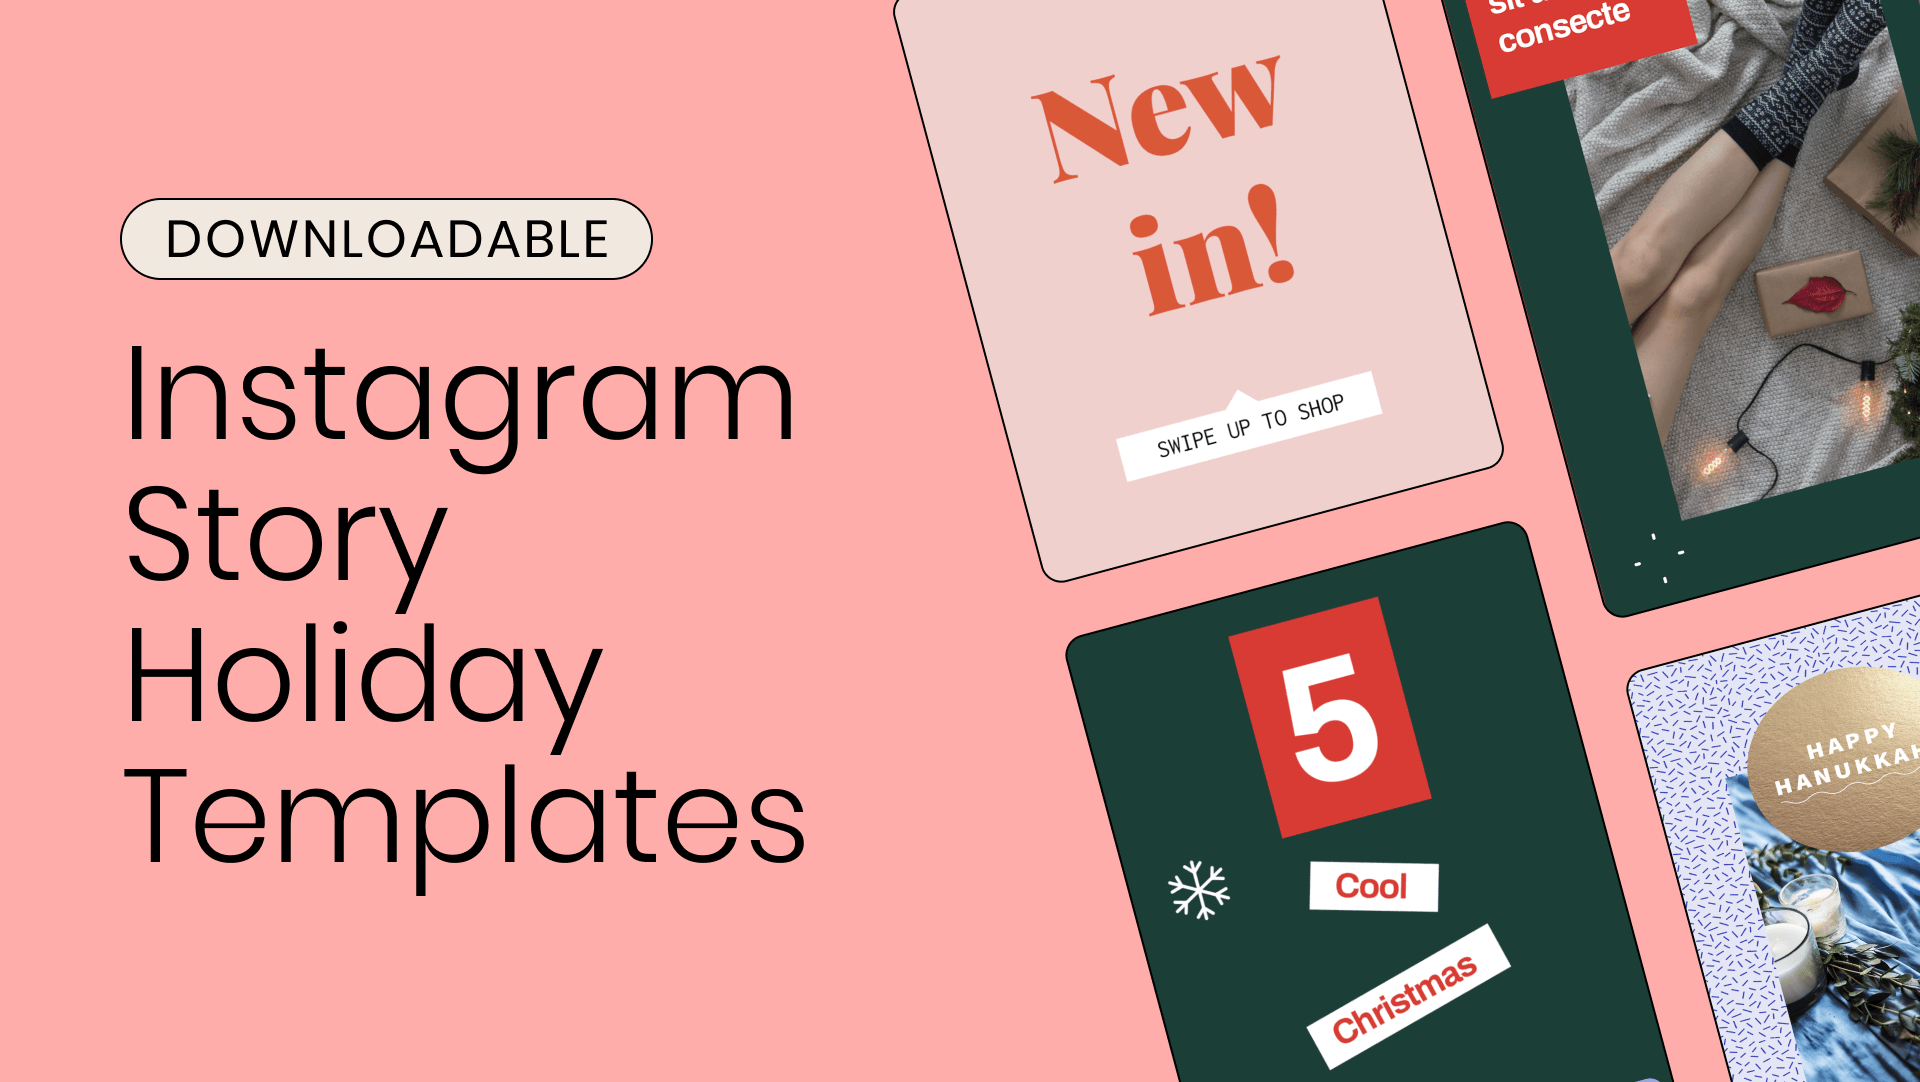 Text reading Downloadable Instagram Story Holiday Templates on red background with holiday story stills